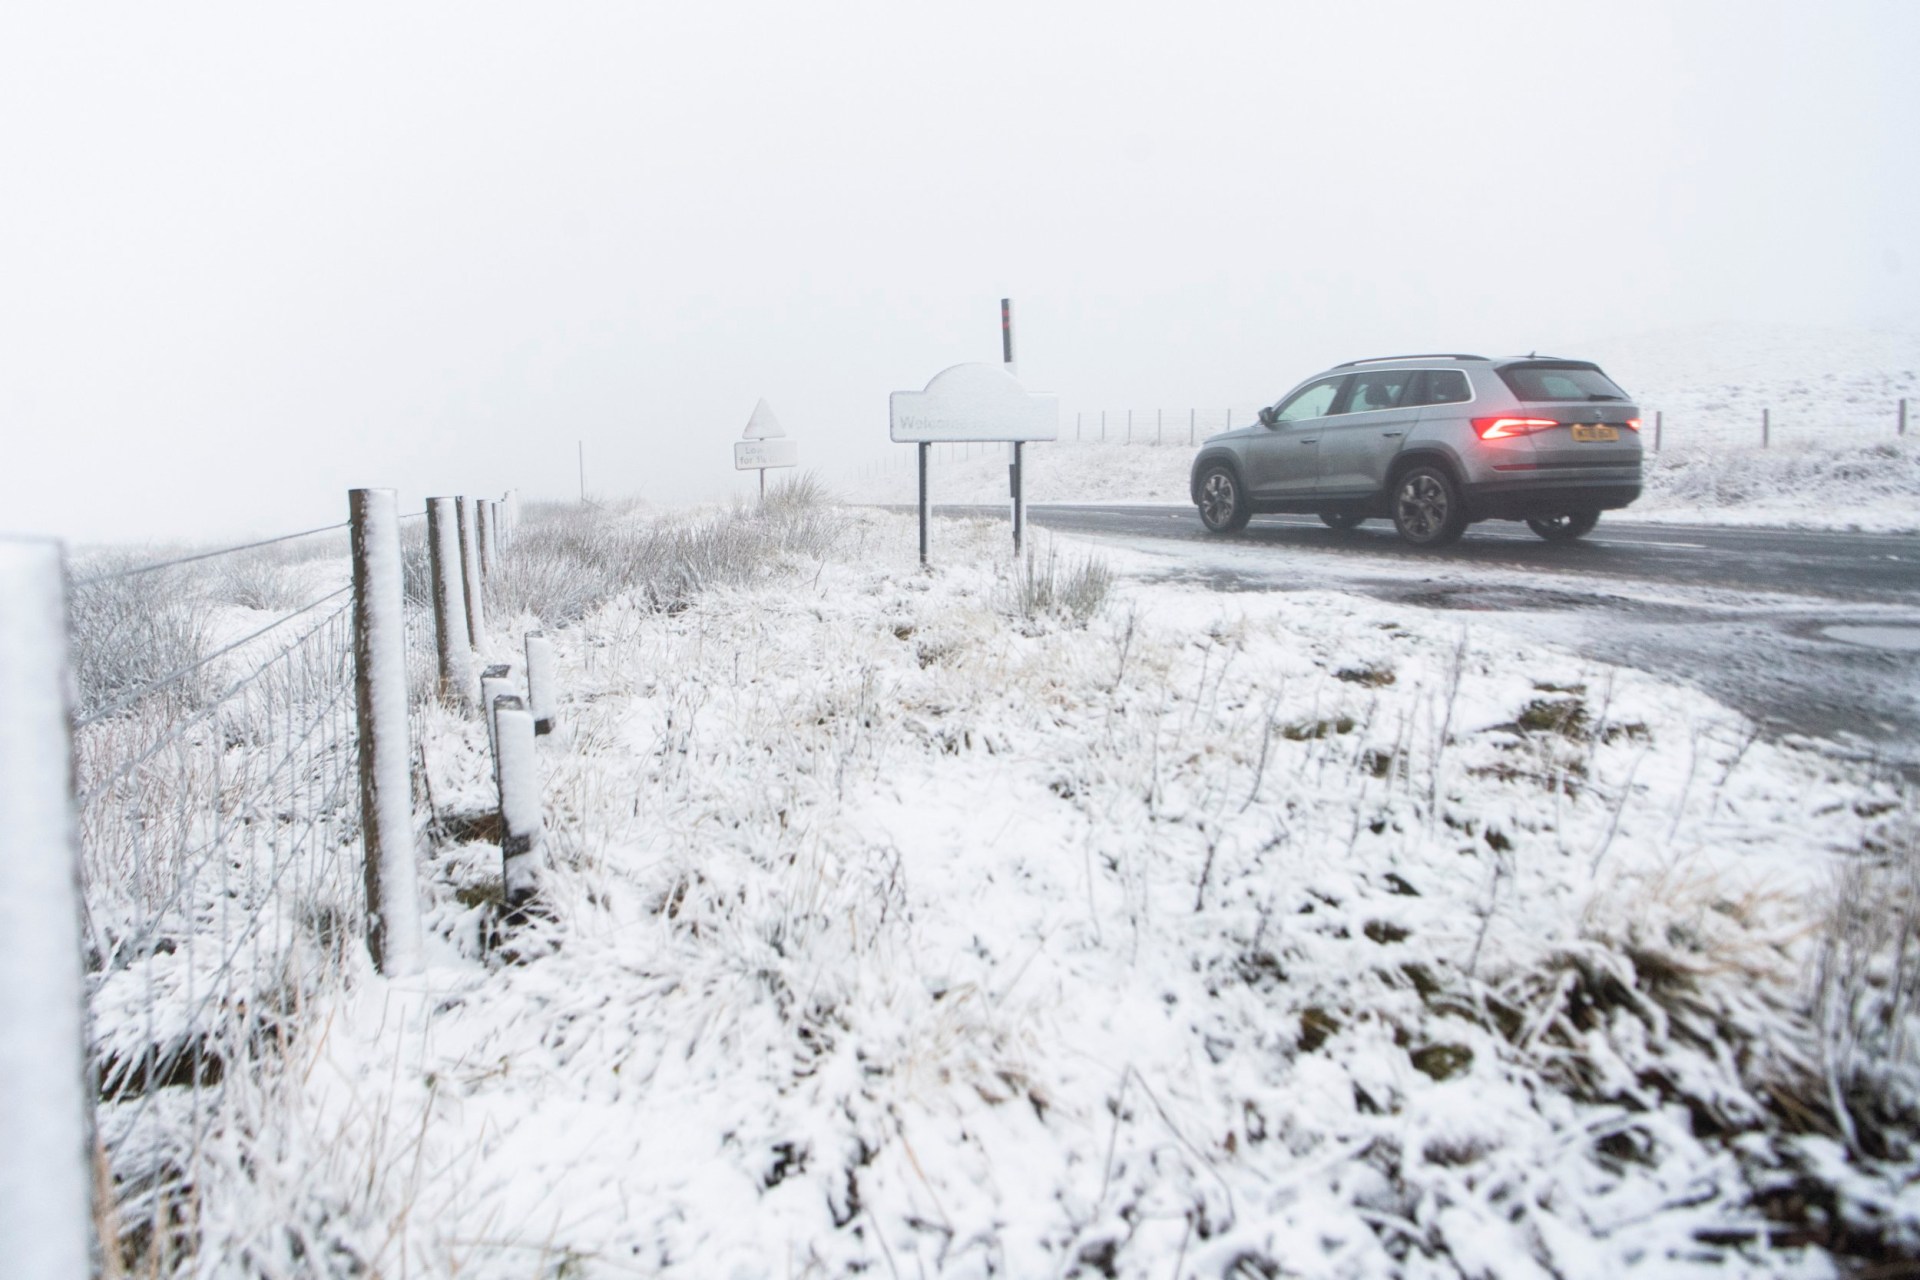 met office reveals where snow will fall this week as temperatures plummet